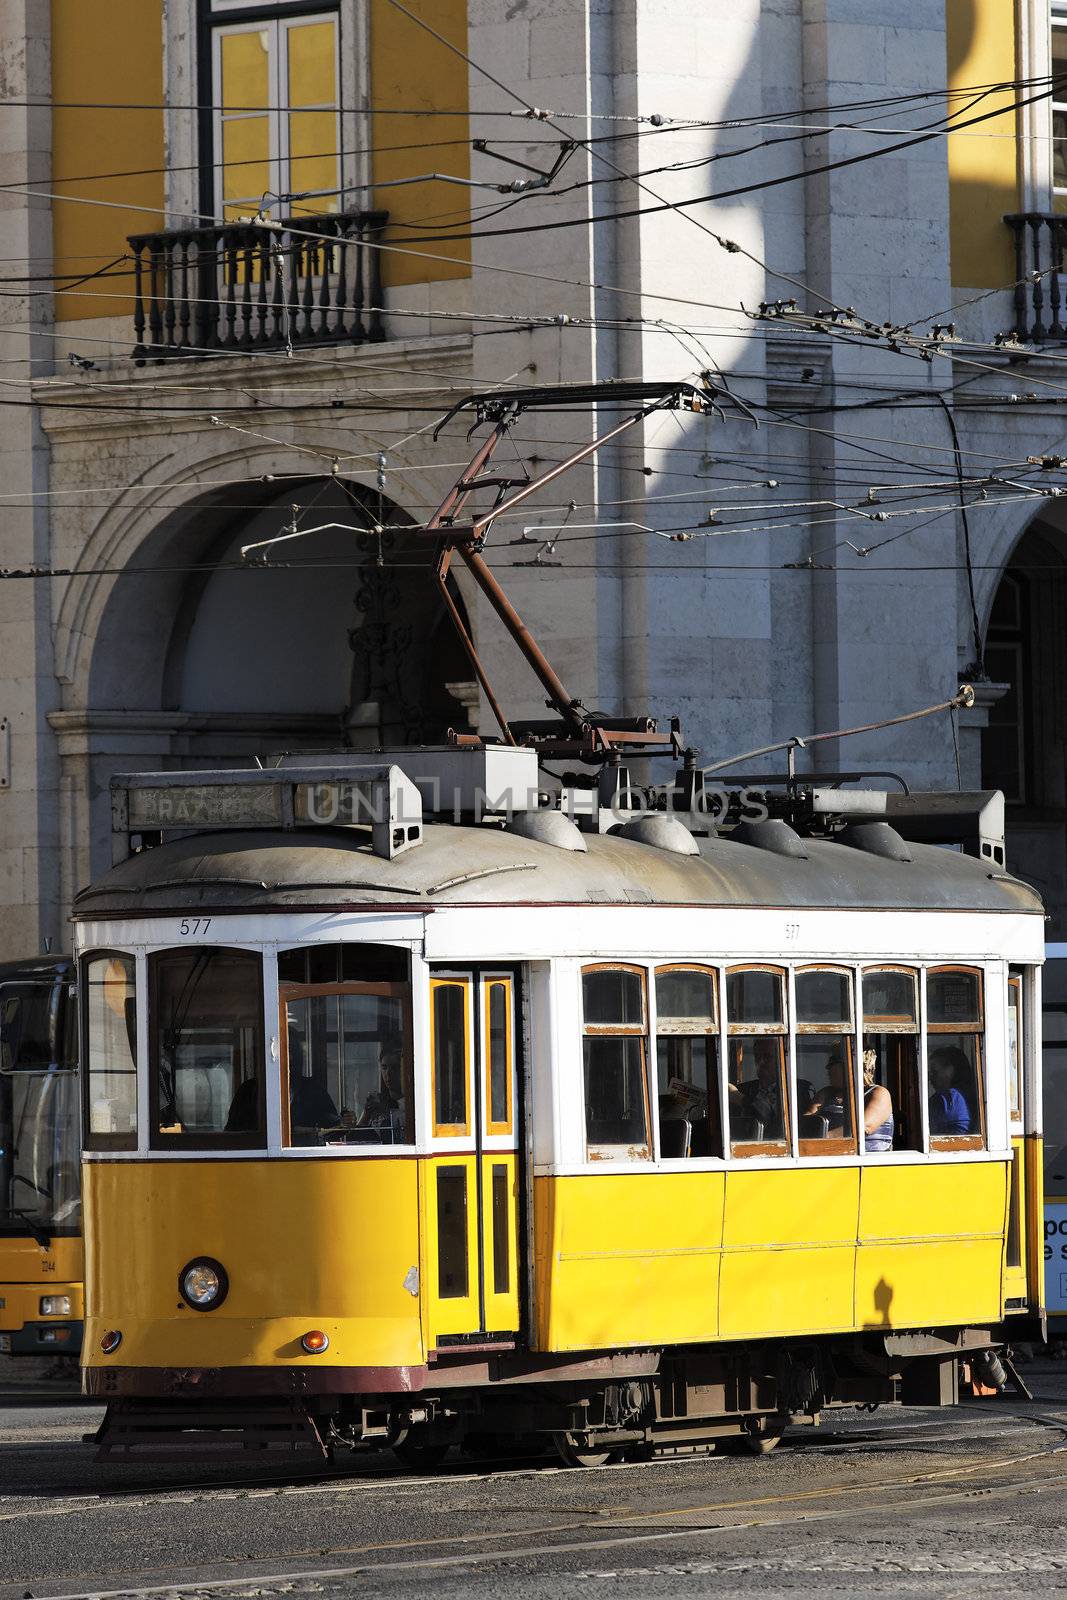 Typical yellow Tram in old street, Lisbon